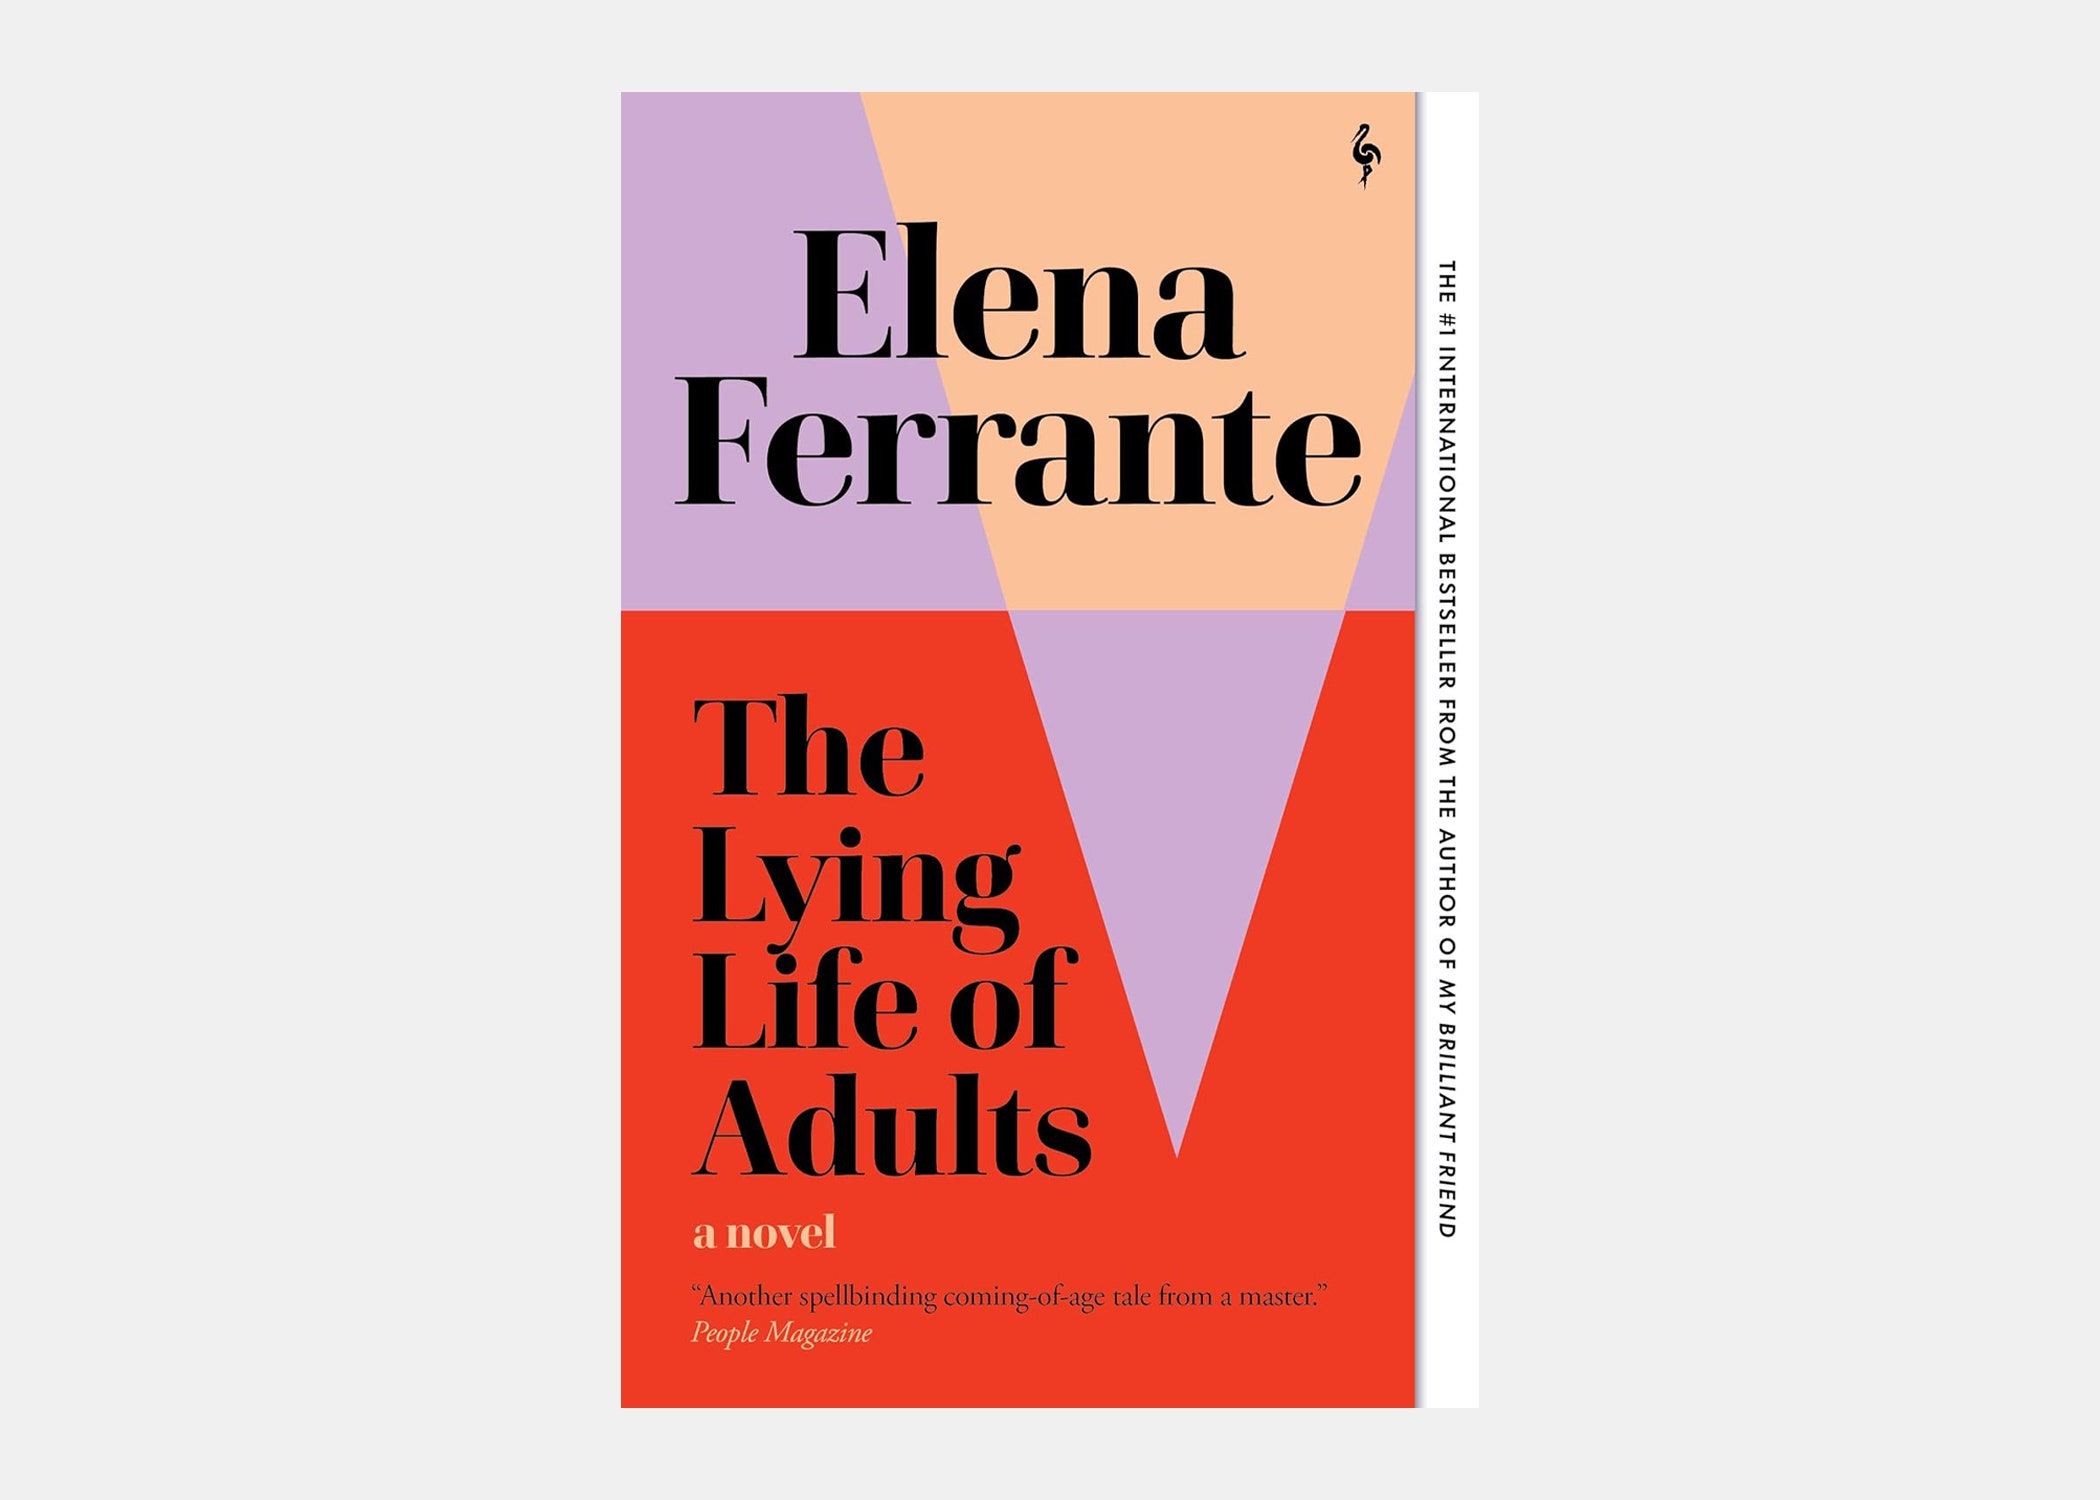 <p><strong>What it’s about:</strong> Ask anyone about good books and Italian culture, and the name Elena Ferrante is bound to come up. The pseudonymous writer’s four novels—known as the Neapolitan Quartet, beginning with the epidemic <em>My Brilliant Friend</em>—seemed to be everywhere in the last decade in the English-speaking world, due in no small part to the genius translation work of Ann Goldstein from the original Italian. Their collaboration shines once again in <em>The Lying Life of Adults</em>, a novel set in Naples (where else?) that depicts “Naples of the heights, which wears a mask of refinement, and Naples of the depths, a place of excess and vulgarity,” as narrated by a 14-year-old girl named Giovanna.</p> <p><strong>The mood it’s giving:</strong> The most observant and clear-eyed diary entries of an insightful young girl in Napoli</p> <p><strong>The book’s first sentence:</strong> “Two years before leaving home my father said to my mother that I was very ugly. The sentence was uttered under his breath, in the apartment that my parents, newly married, had bought at the top of Via San Giacomo dei Capri, in Rione Alto.”</p> $12, Amazon. <a href="https://www.amazon.com/Lying-Life-Adults-Novel/dp/1609457153/ref=tmm_pap_swatch_0">Get it now!</a><p>Sign up to receive the latest news, expert tips, and inspiration on all things travel</p><a href="https://www.cntraveler.com/newsletter/the-daily?sourceCode=msnsend">Inspire Me</a>